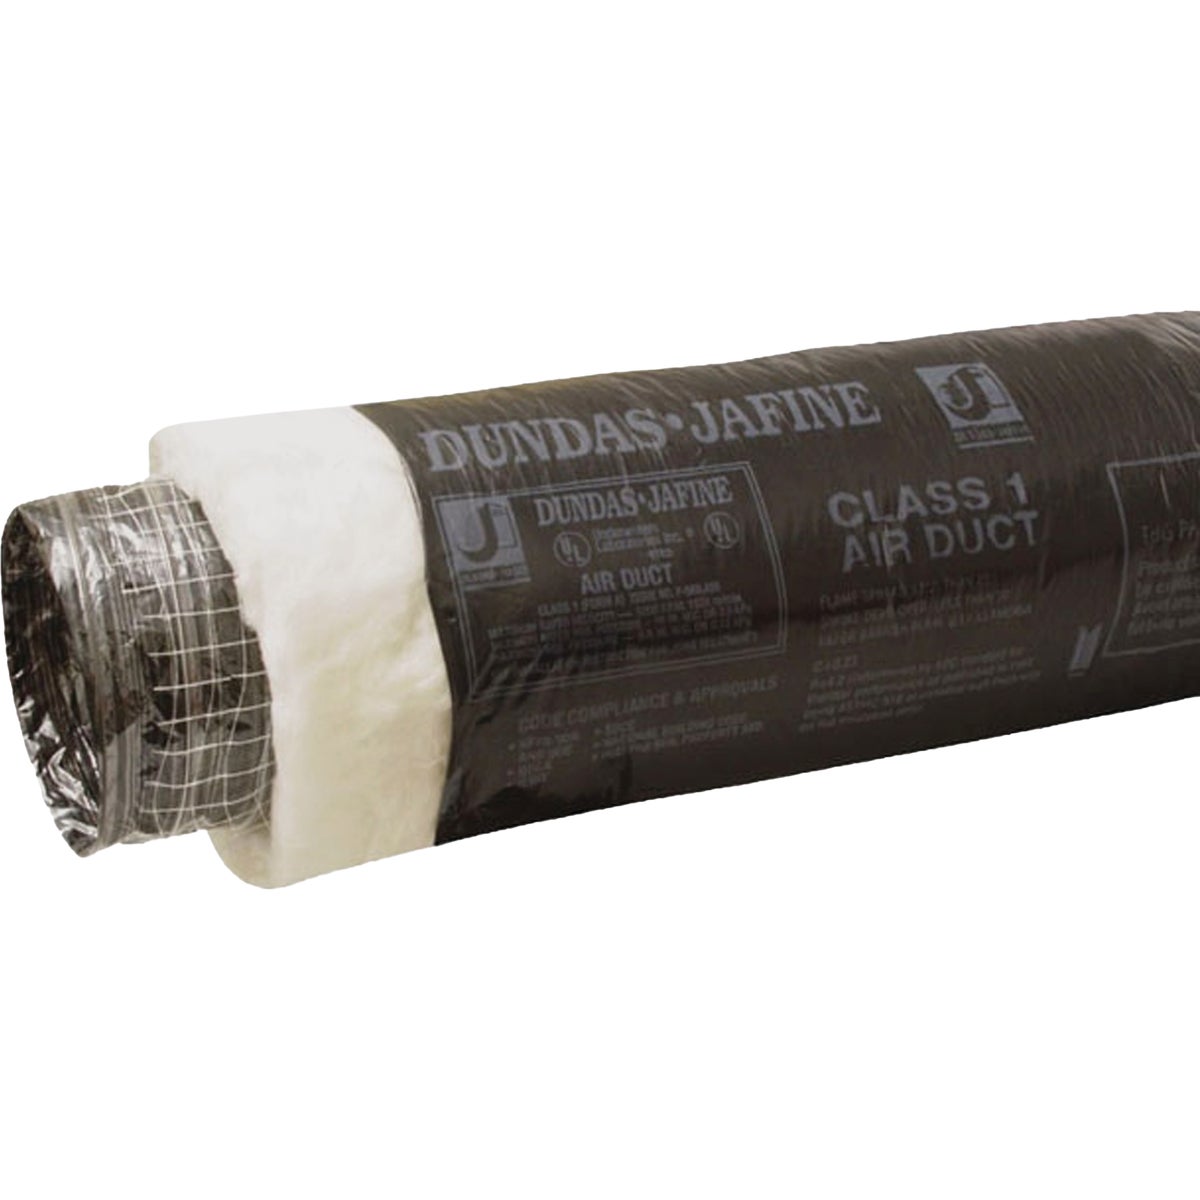 Dundas Jafine 6 In. I.D. x 25 Ft. R6.0 Black Jacket Flexible Insulated Ducting